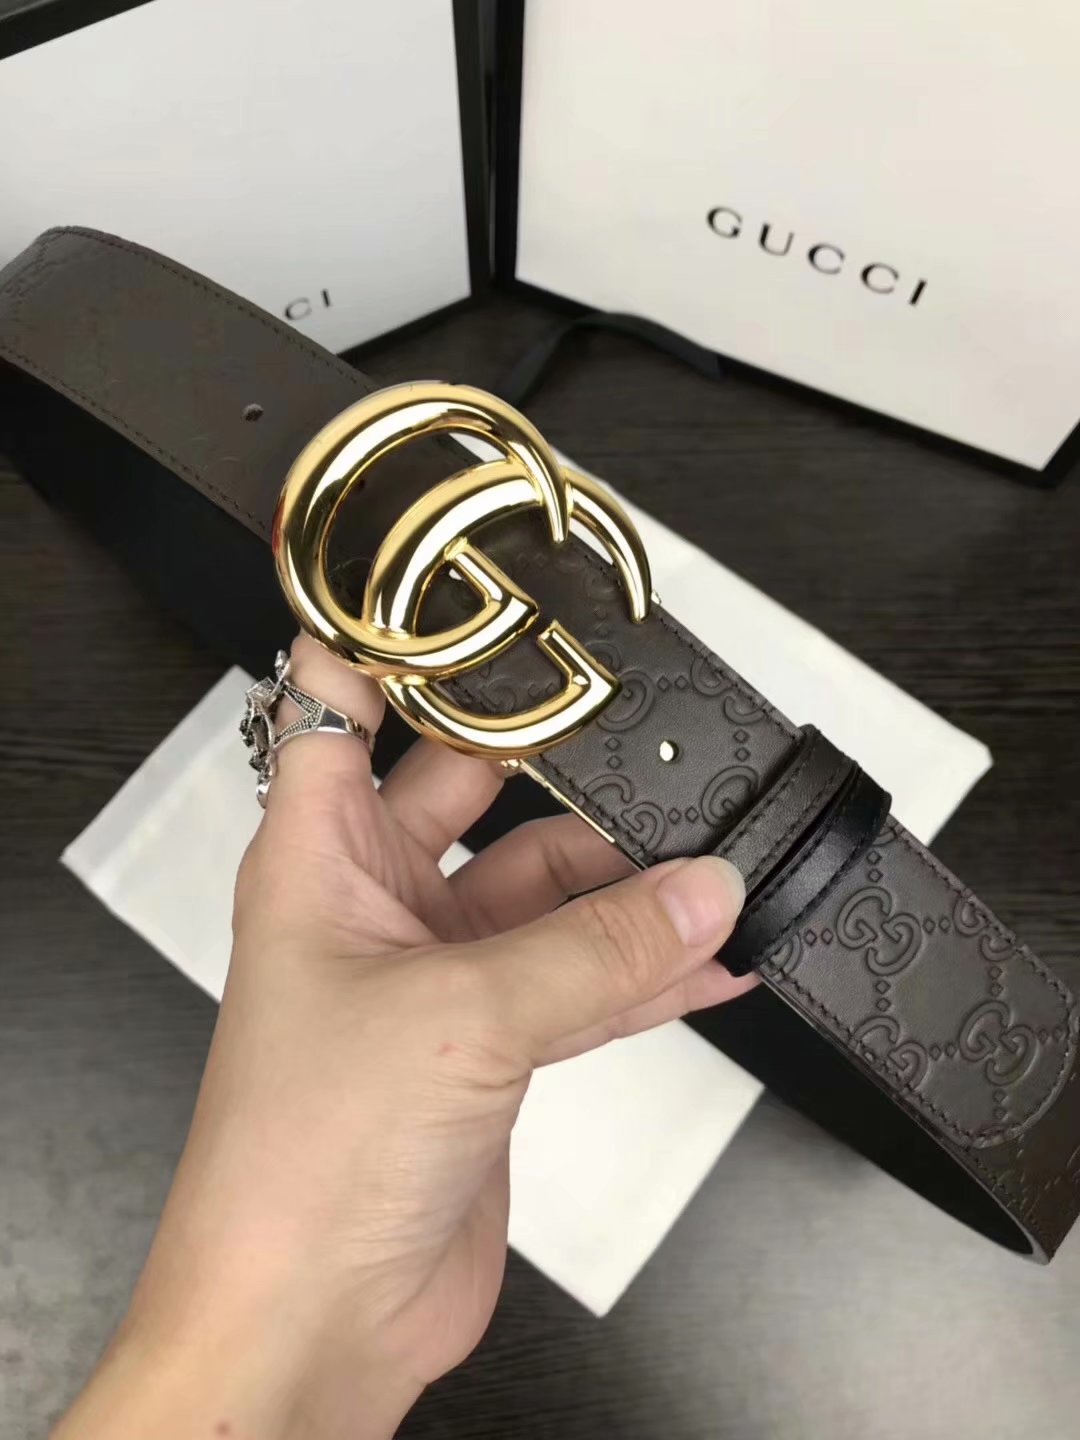 Cheap Replica Gucci Men Leather Belt Width 3.8cm With Silver Buckle 065